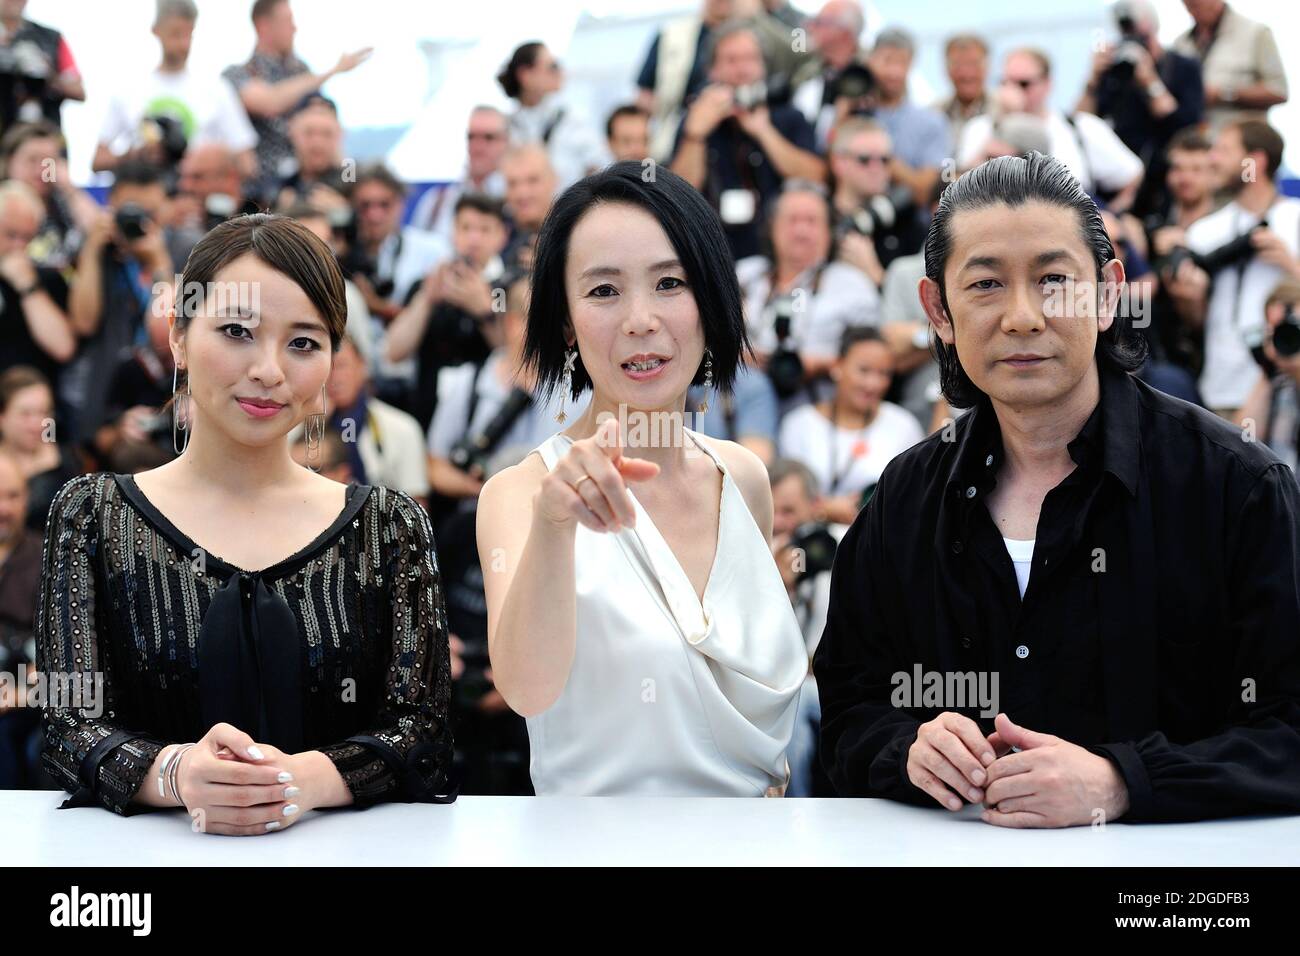 Ayame Misaki, Naomi Kawase and Masatoshi Nagase attending the Radiance photocall as part of the 70th Cannes Film Festival in Cannes, France on May 23, 2017. Photo by Aurore Marechal/ABACAPRESS.COM Stock Photo